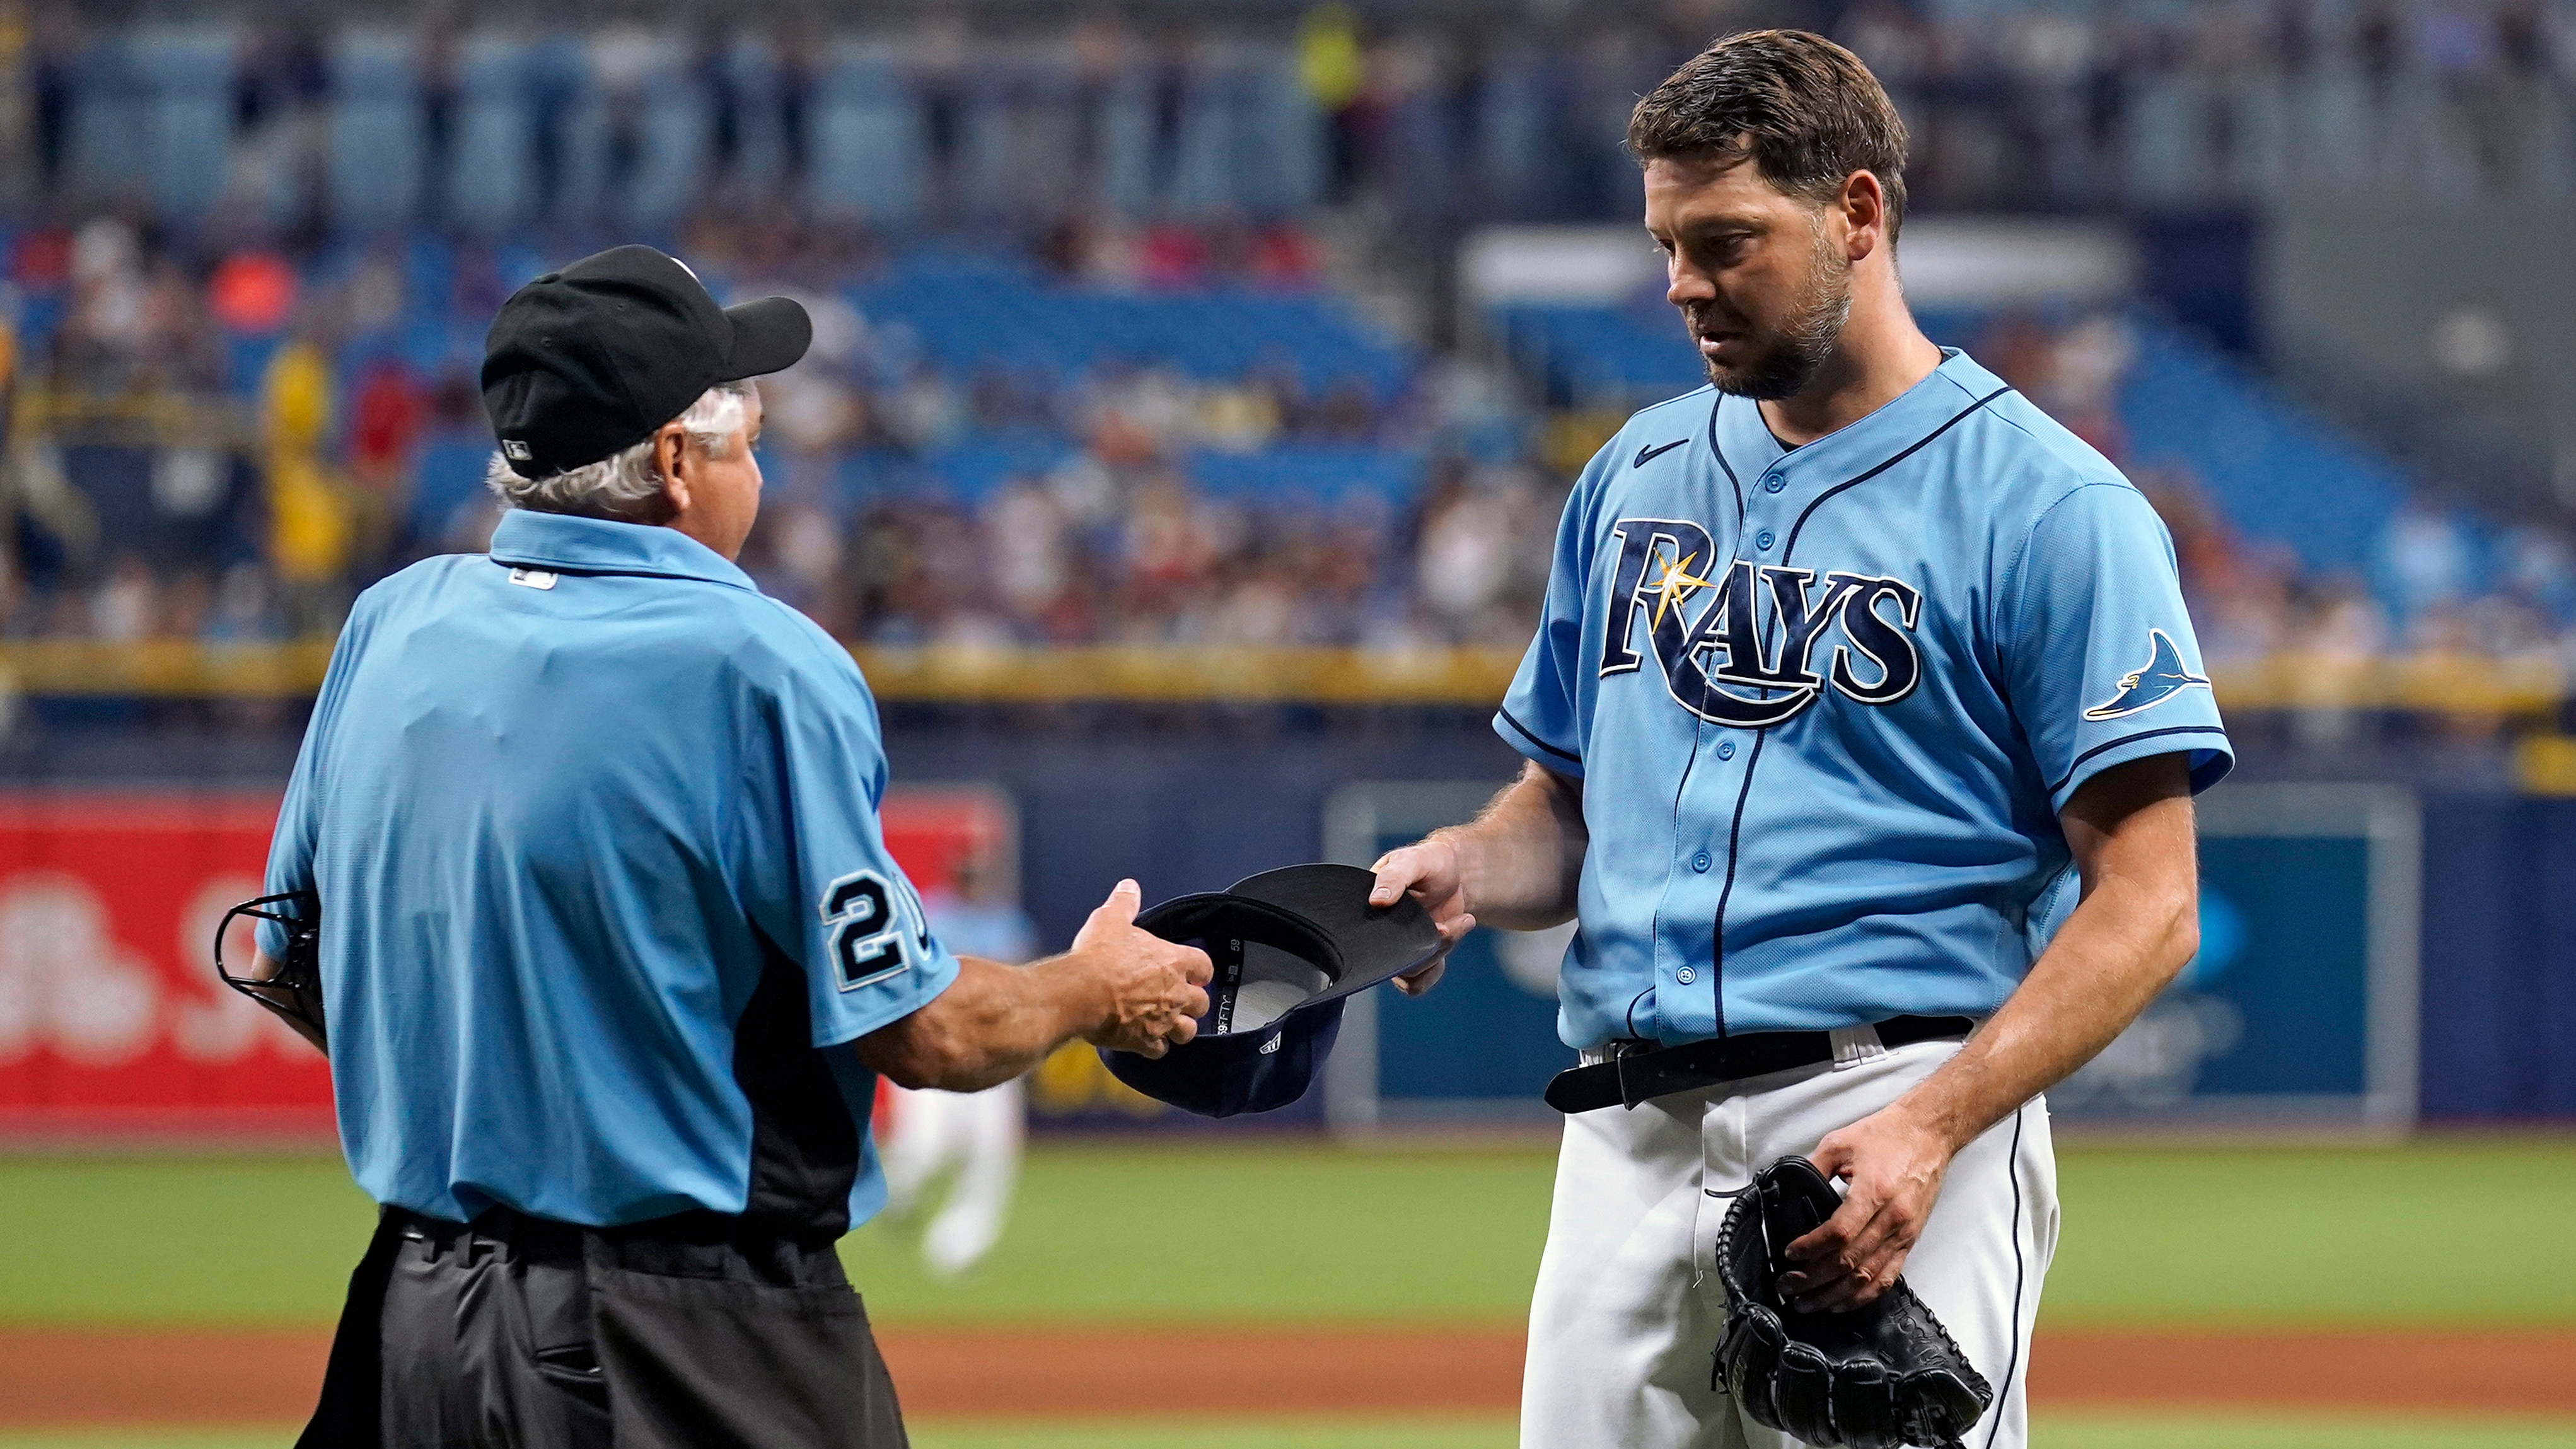 Rays' Rich Hill: 'We don't want to turn baseball into Jerry Springer'